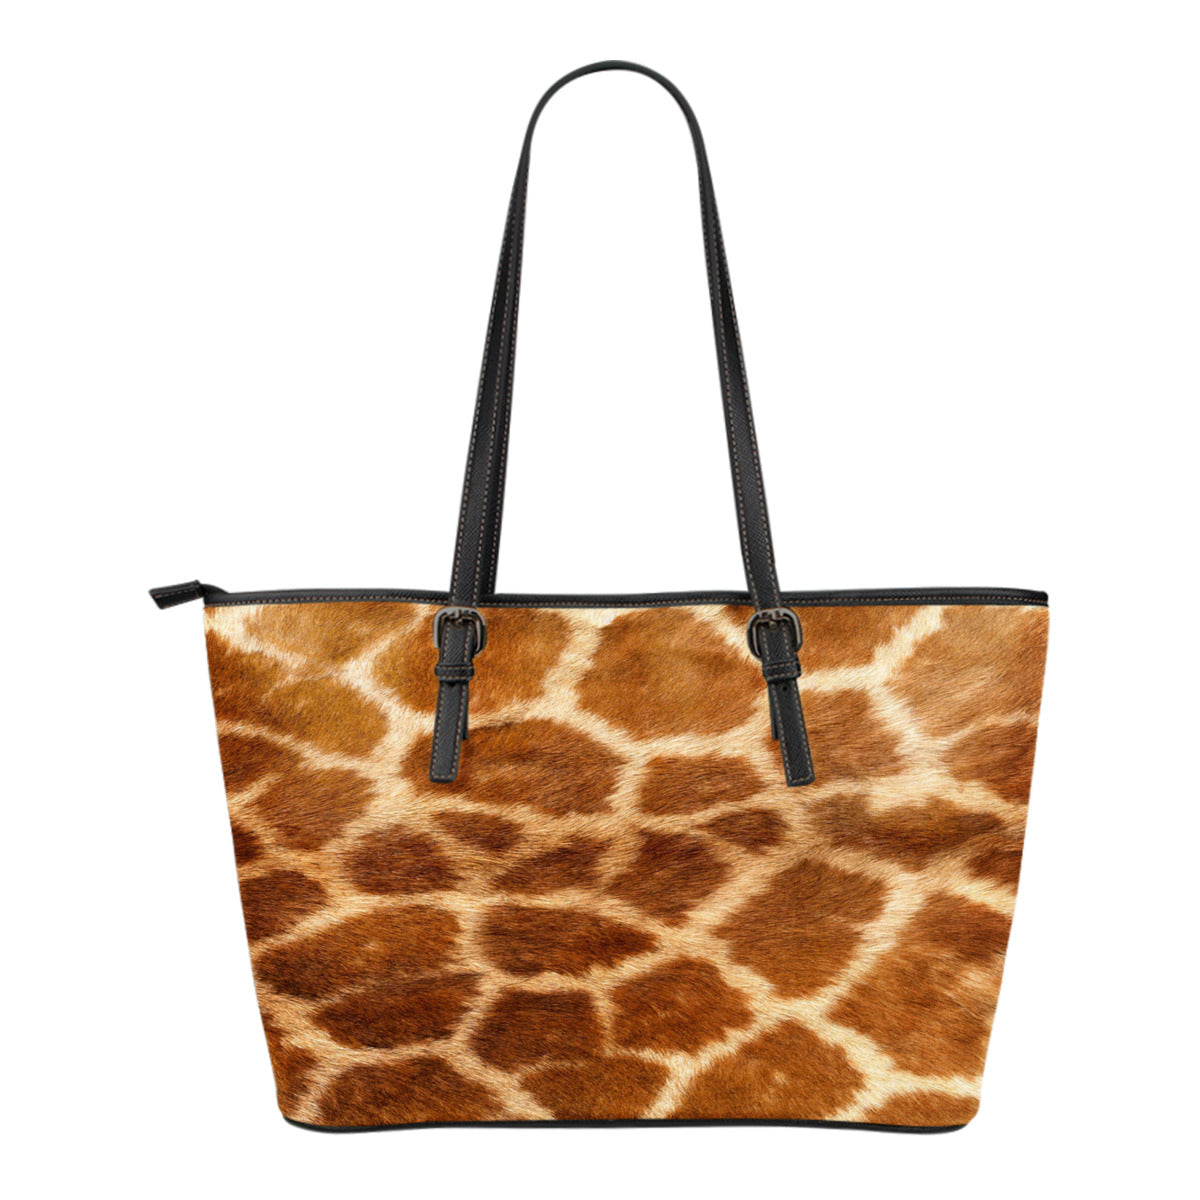 Animal Skin Texture Themed Design C11 Women Small Leather Tote Bag